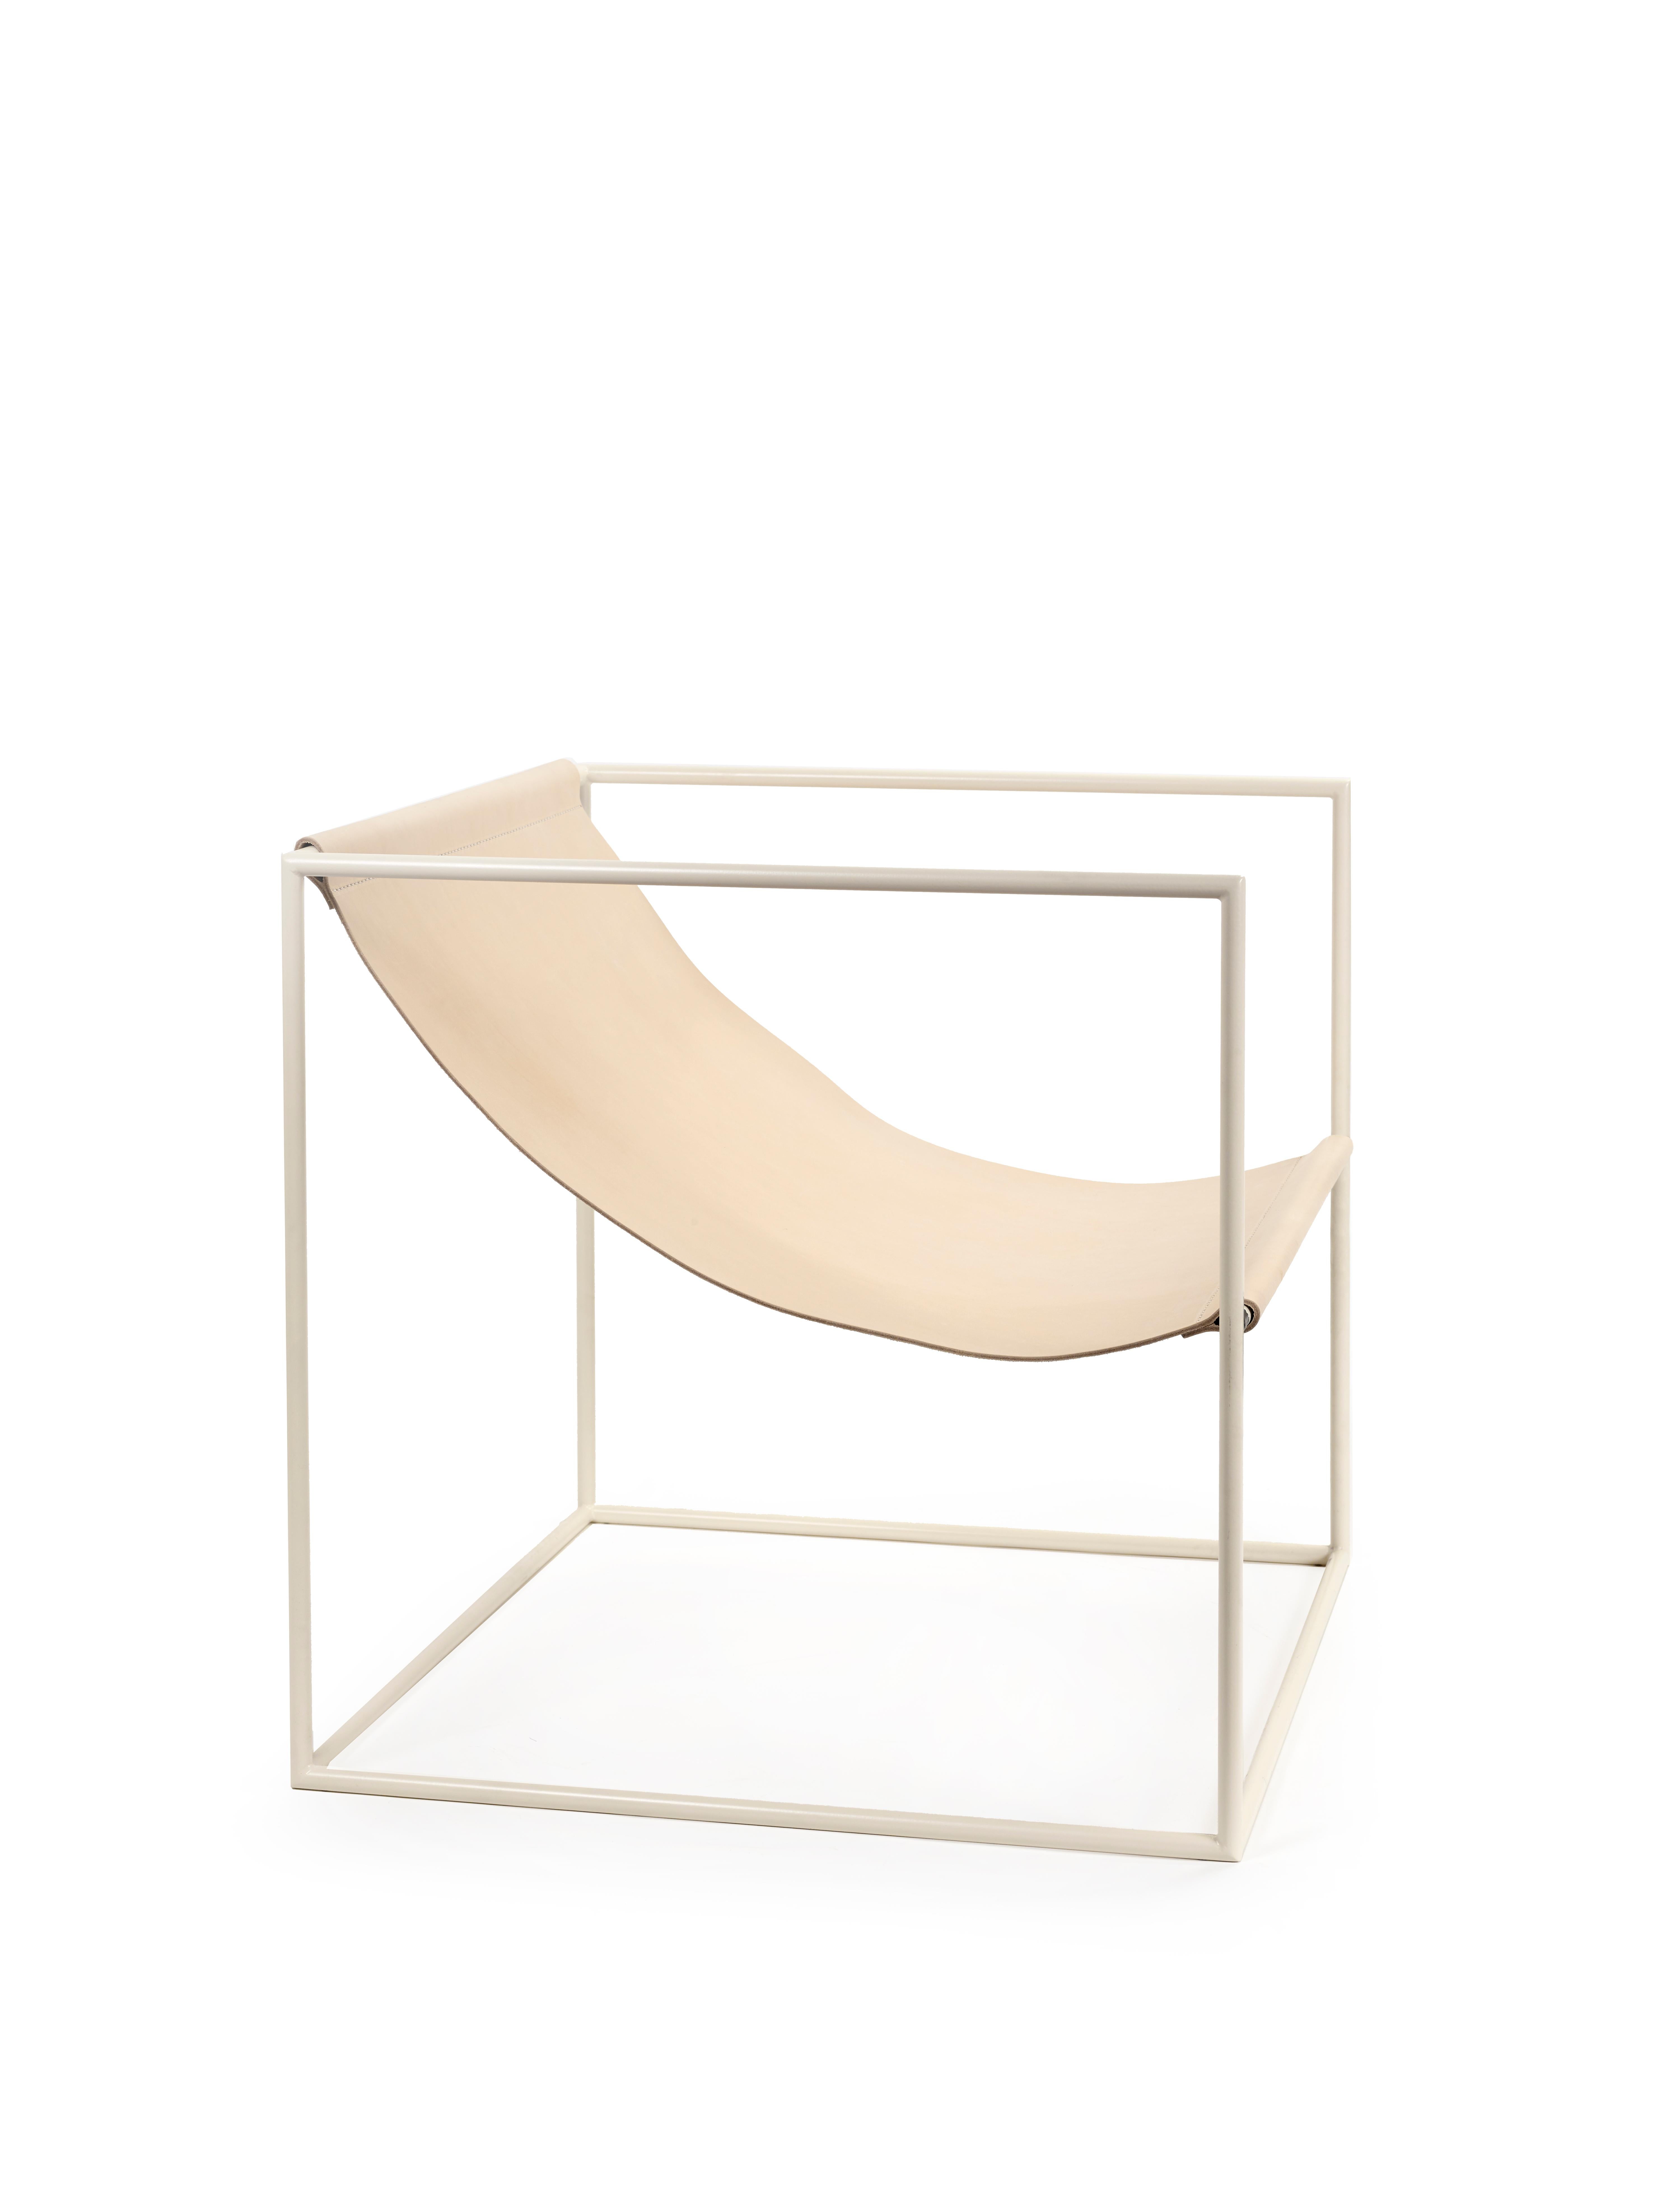 Organic Modern Contemporary Leather Lounge Chair 'Solo Seat' by Muller Van Severen, White Frame For Sale